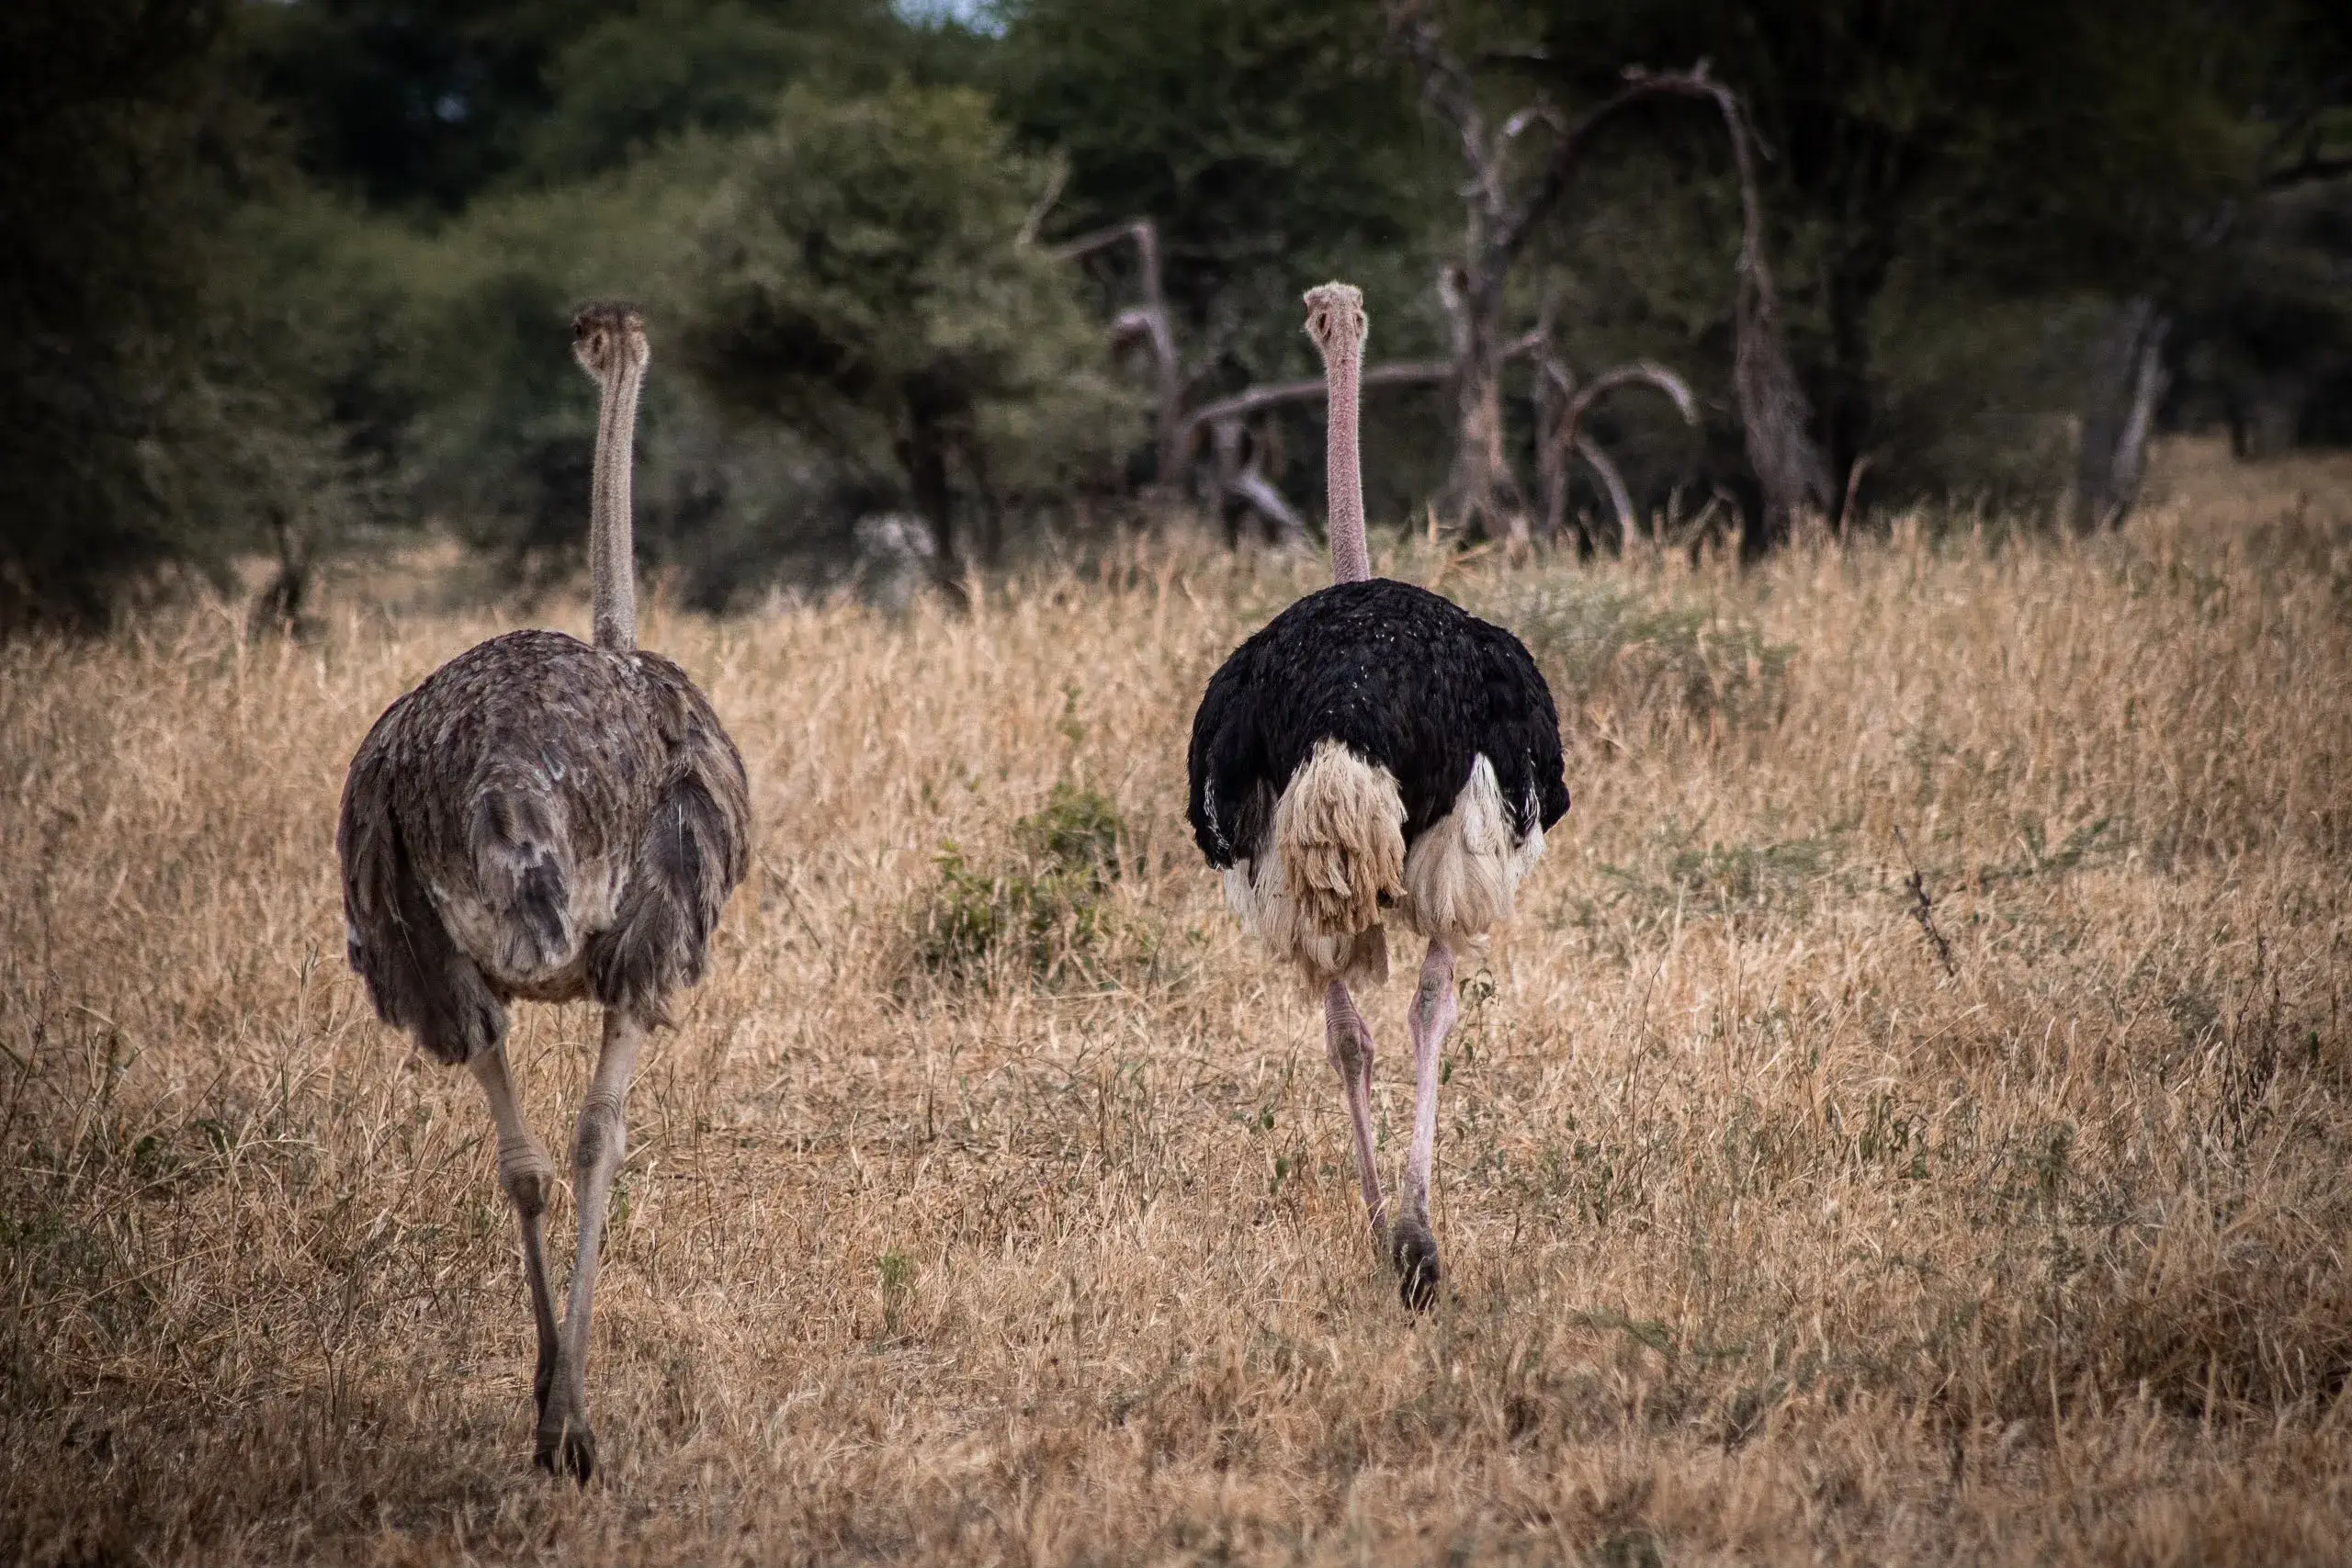 Ostriches spotted while hiking Kilimanjaro